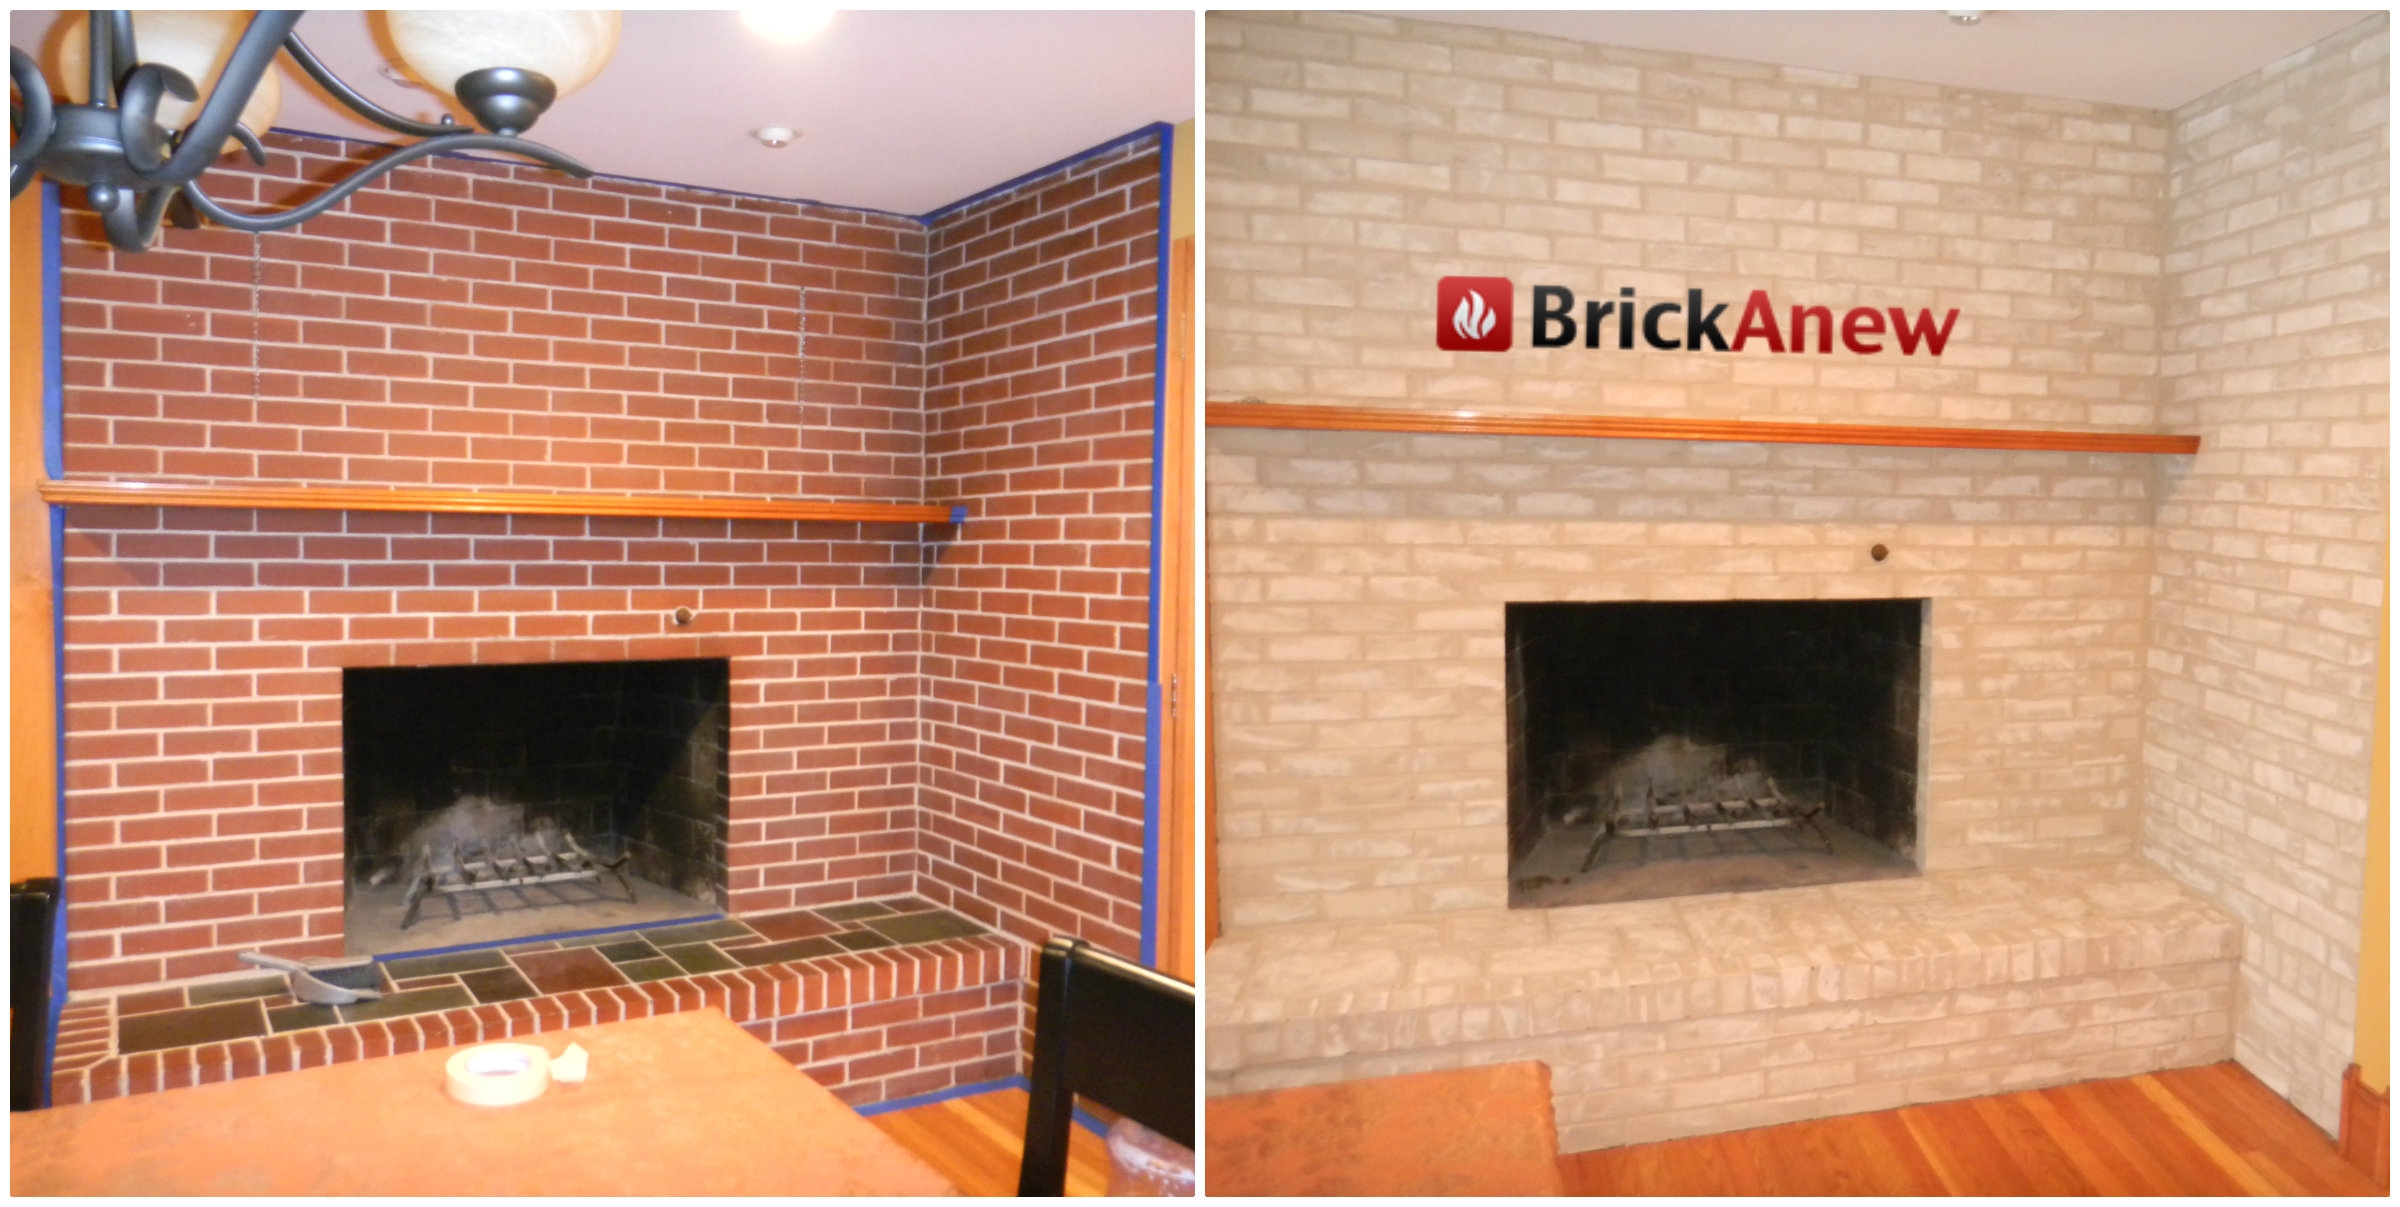 Fireplace Brick Liner Awesome Covering Brick Fireplace with Tile Charming Fireplace